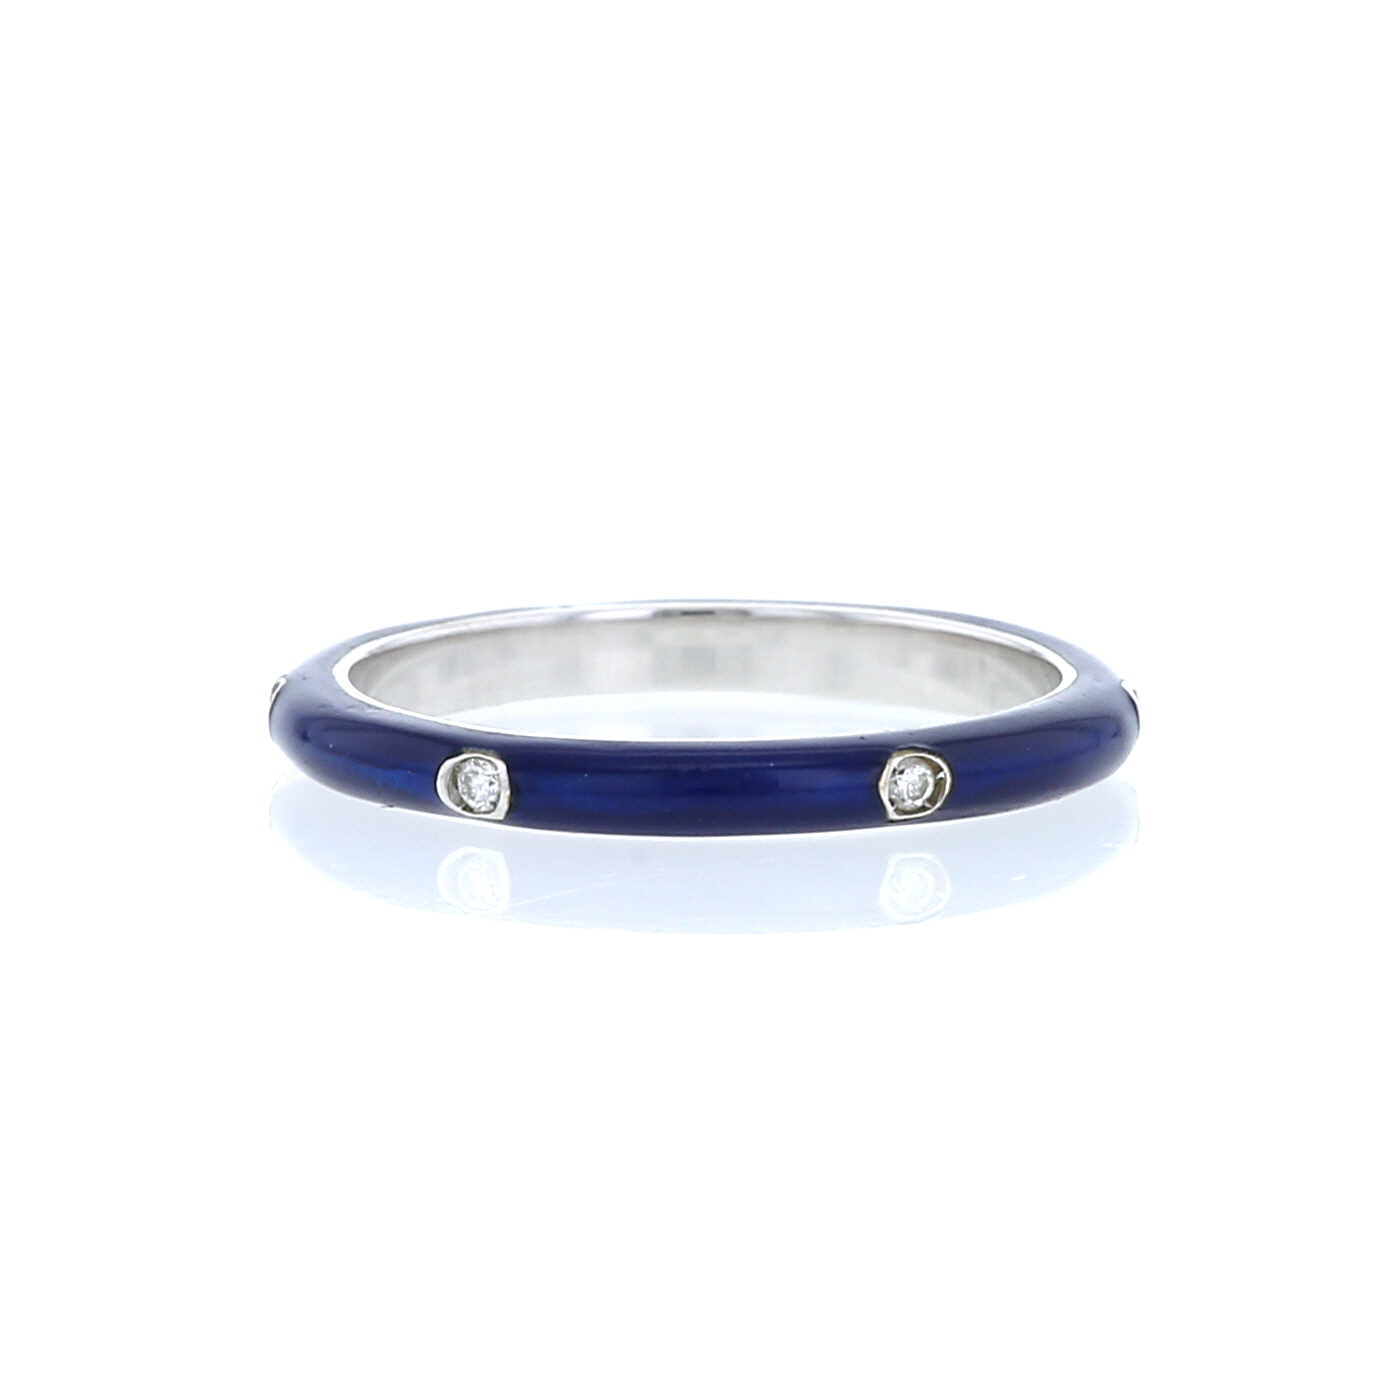 Ring In White Gold, Enamel And Diamonds